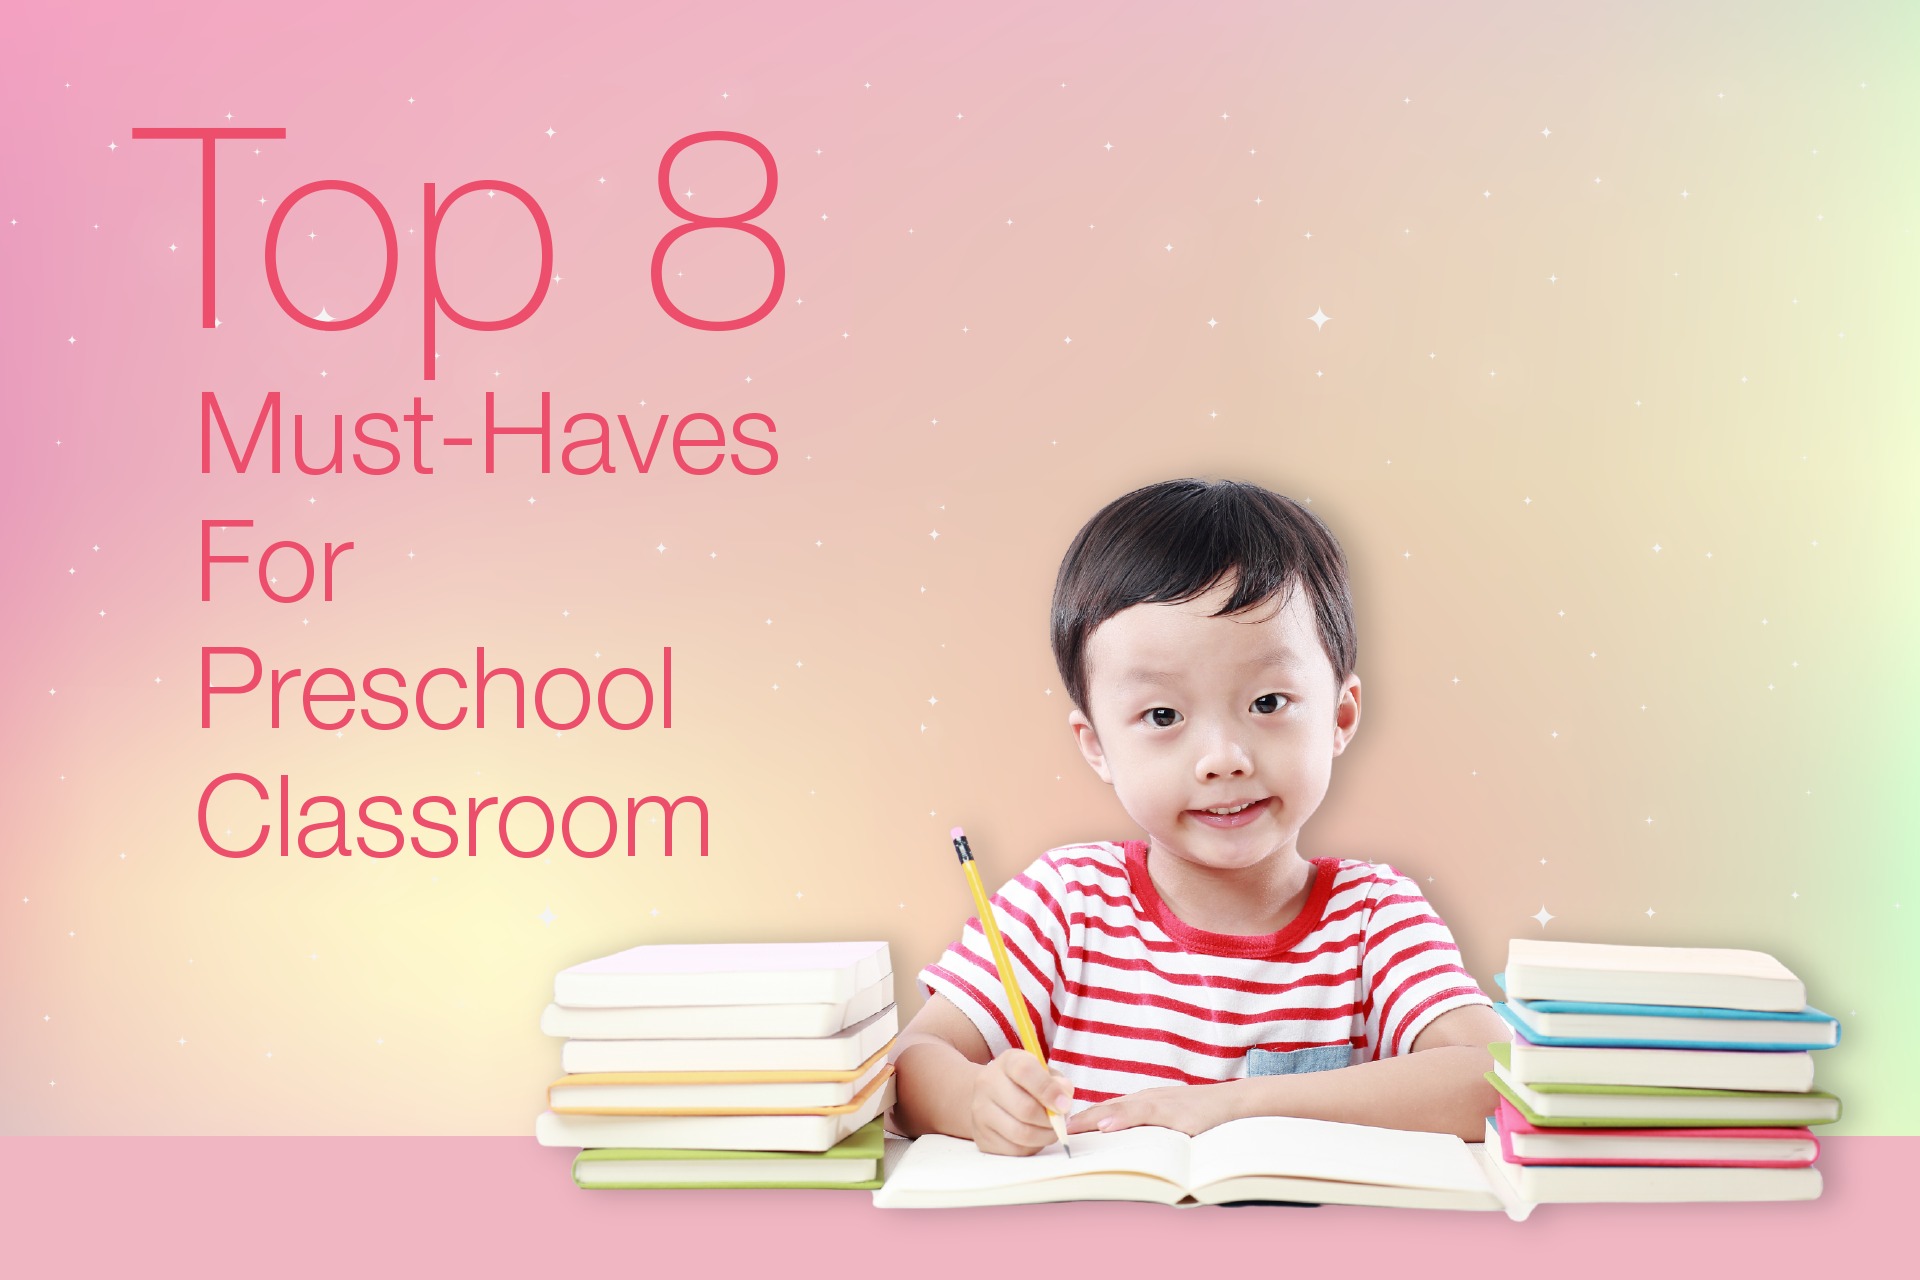 Basic Must-Haves For Preschool Classroom